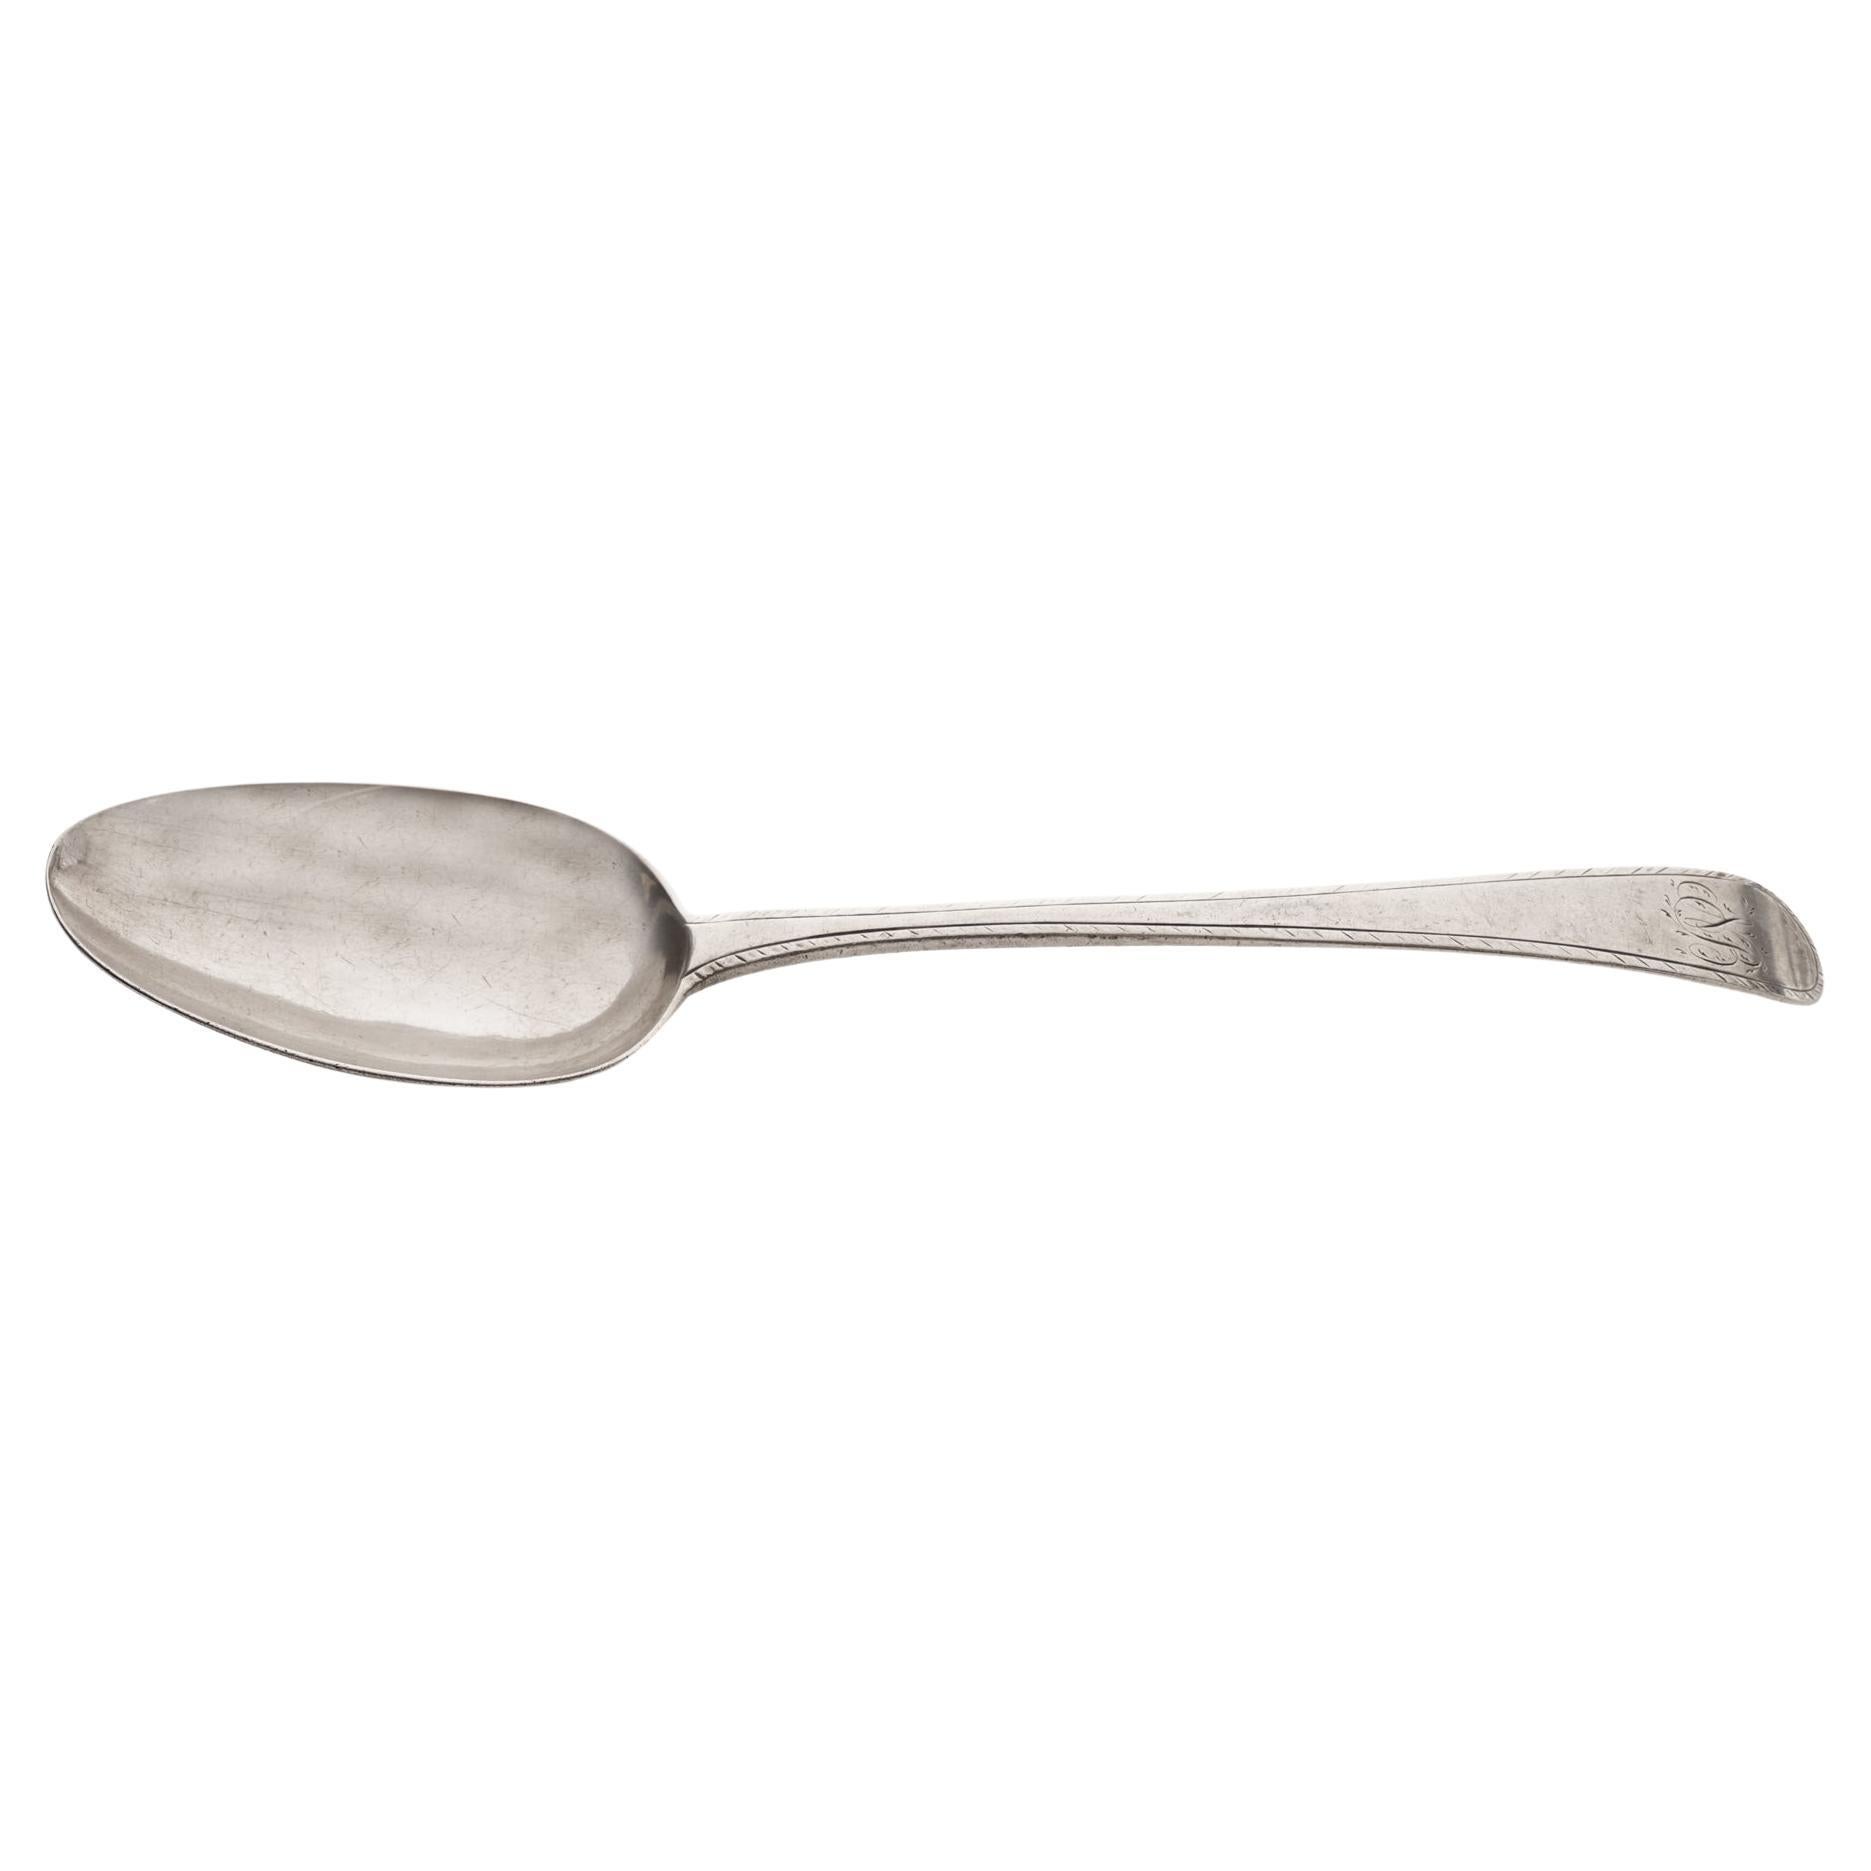 Antique Georgian sterling 925 silver large spoon by Hester Bateman For Sale